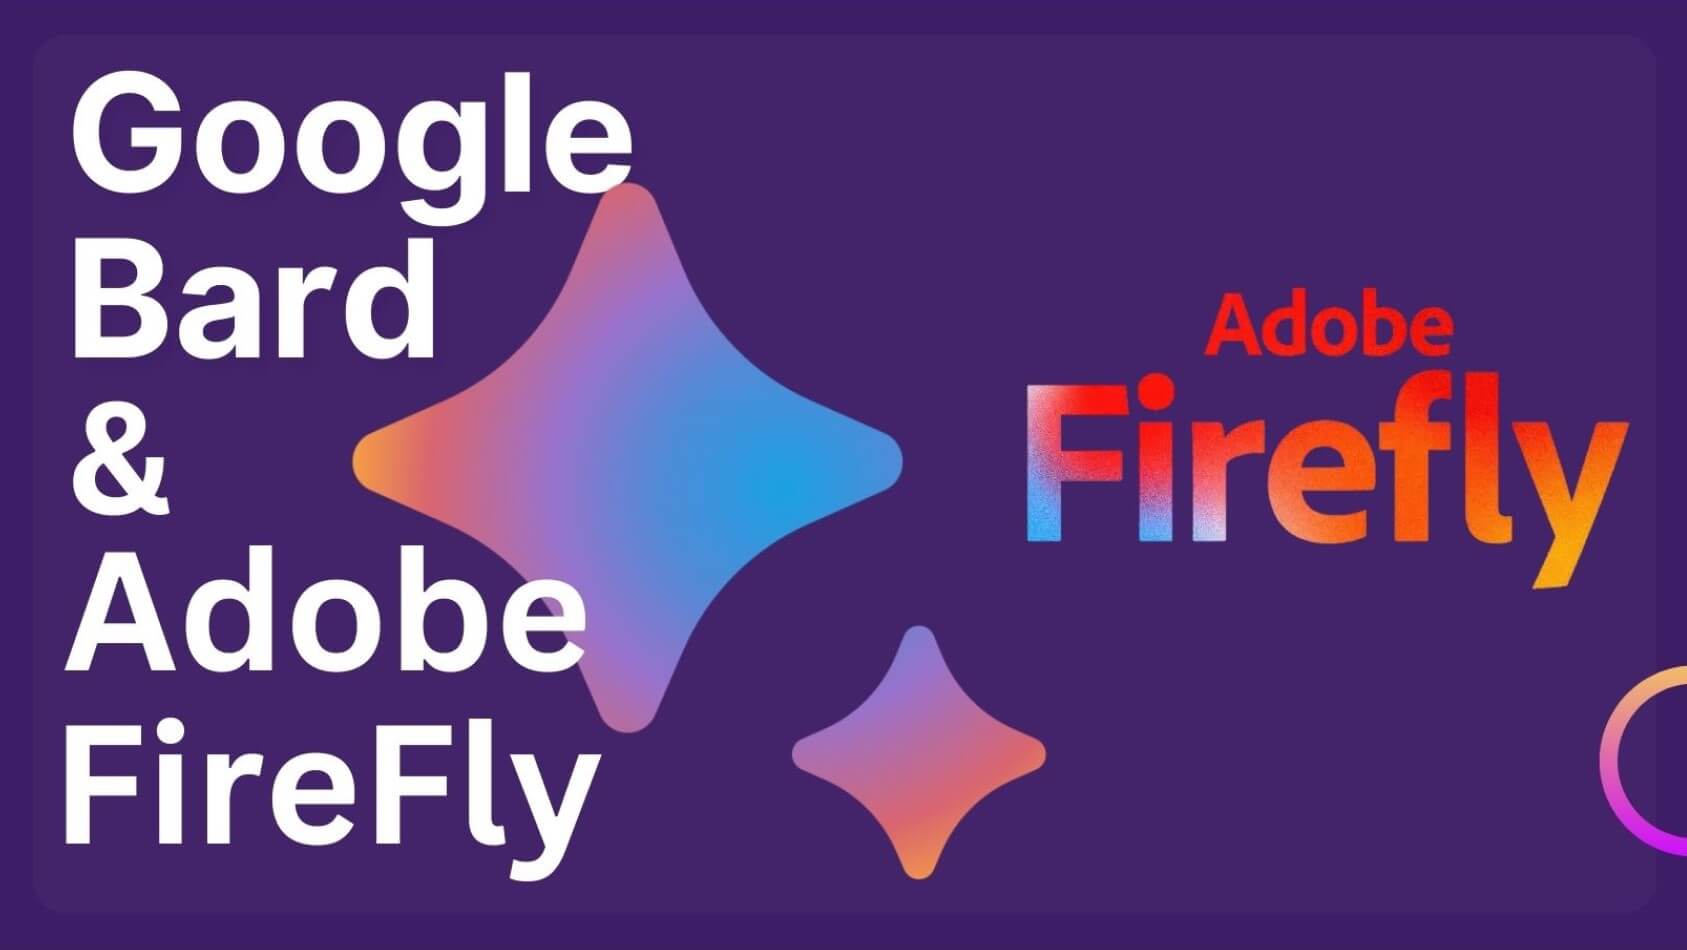 Google Bard AI and Adobe Firefly for Built-In Image Generator